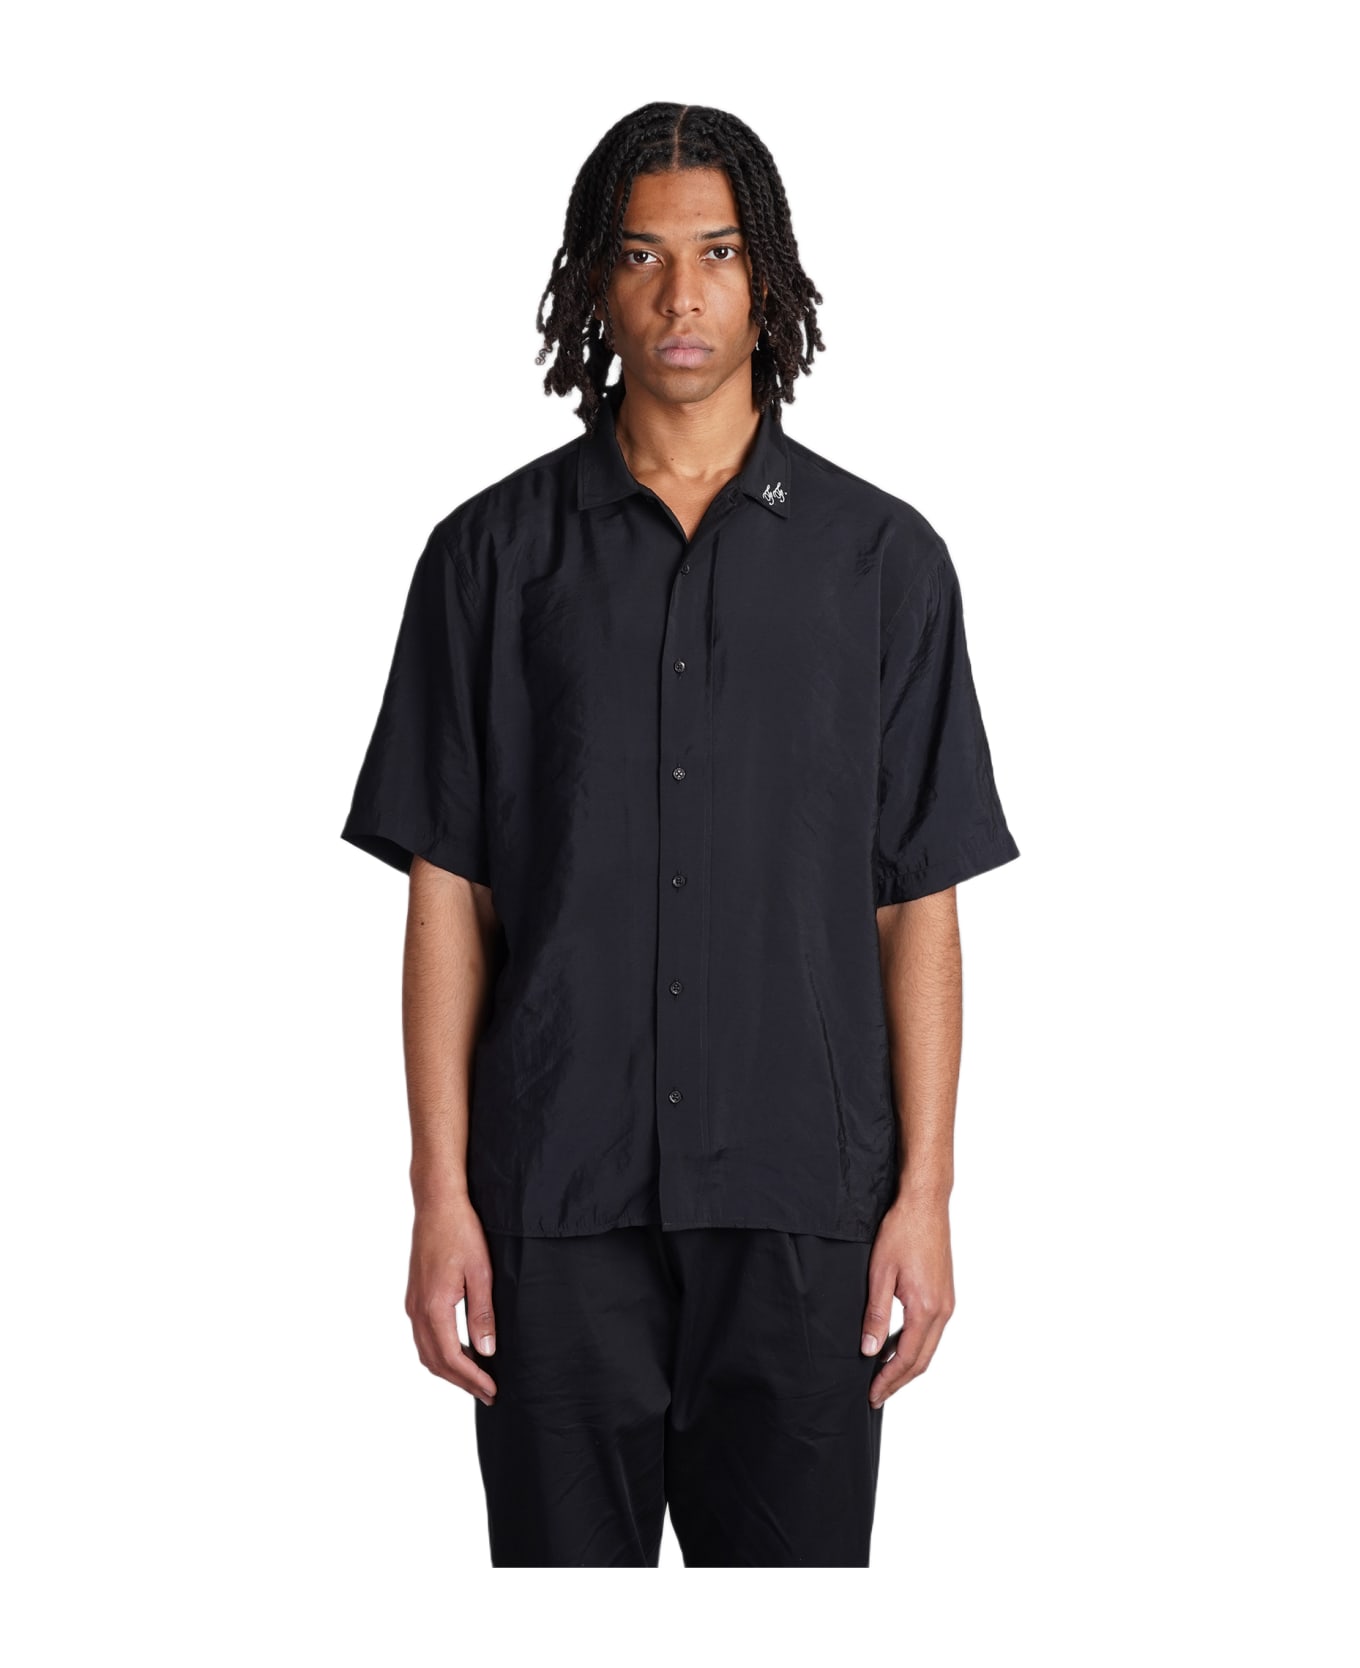 Family First Milano Shirt In Black Paper - BLACK